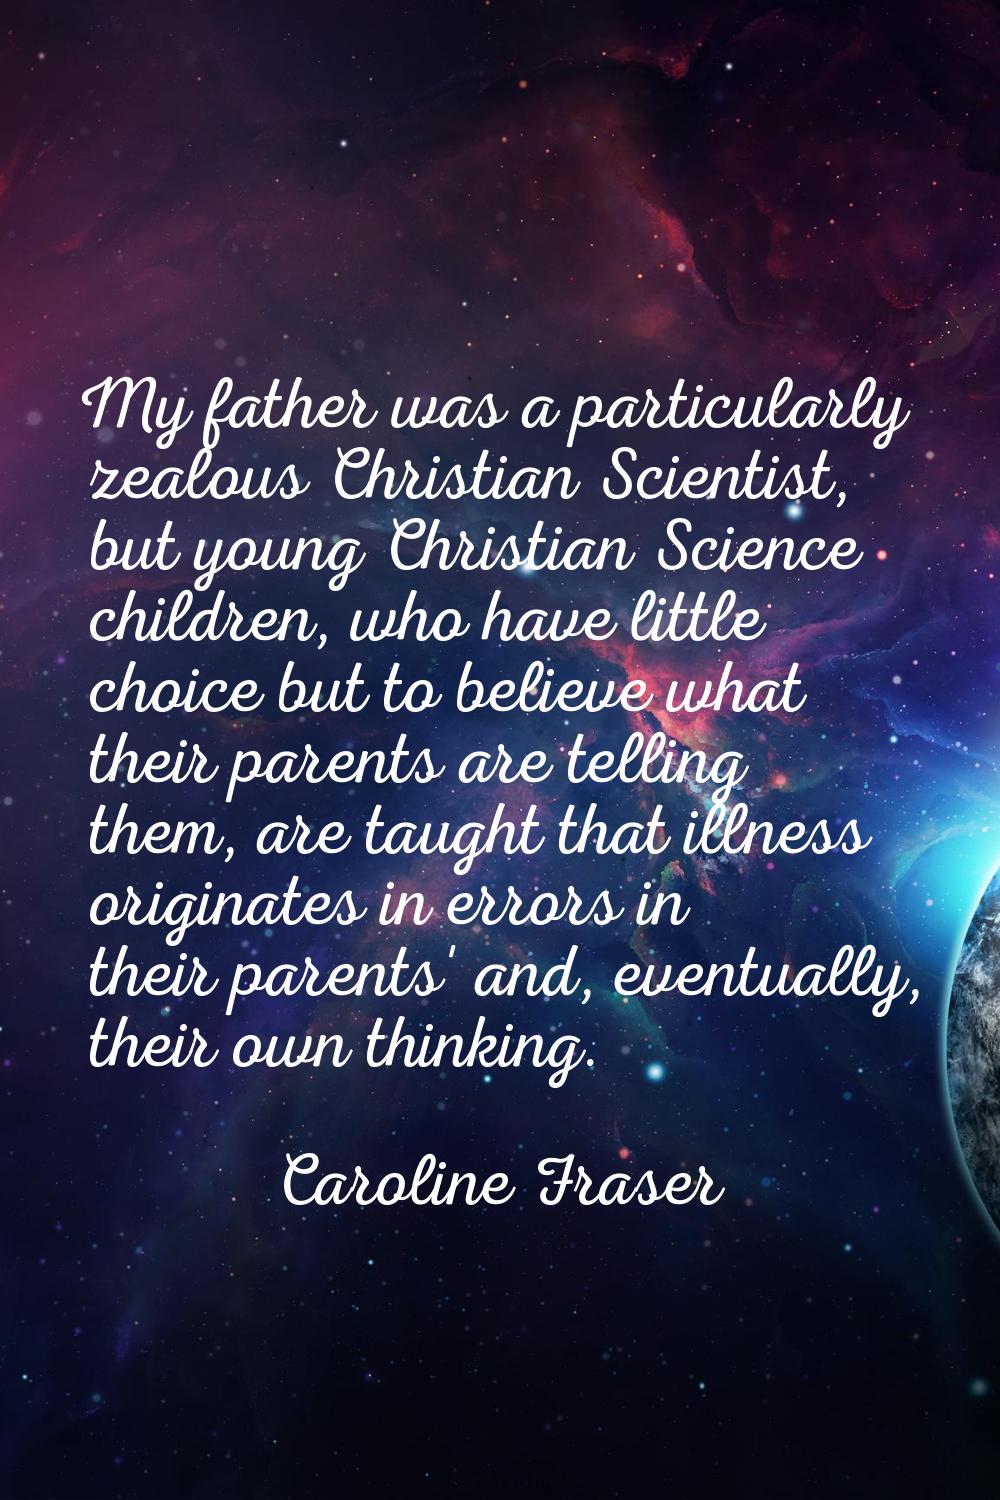 My father was a particularly zealous Christian Scientist, but young Christian Science children, who